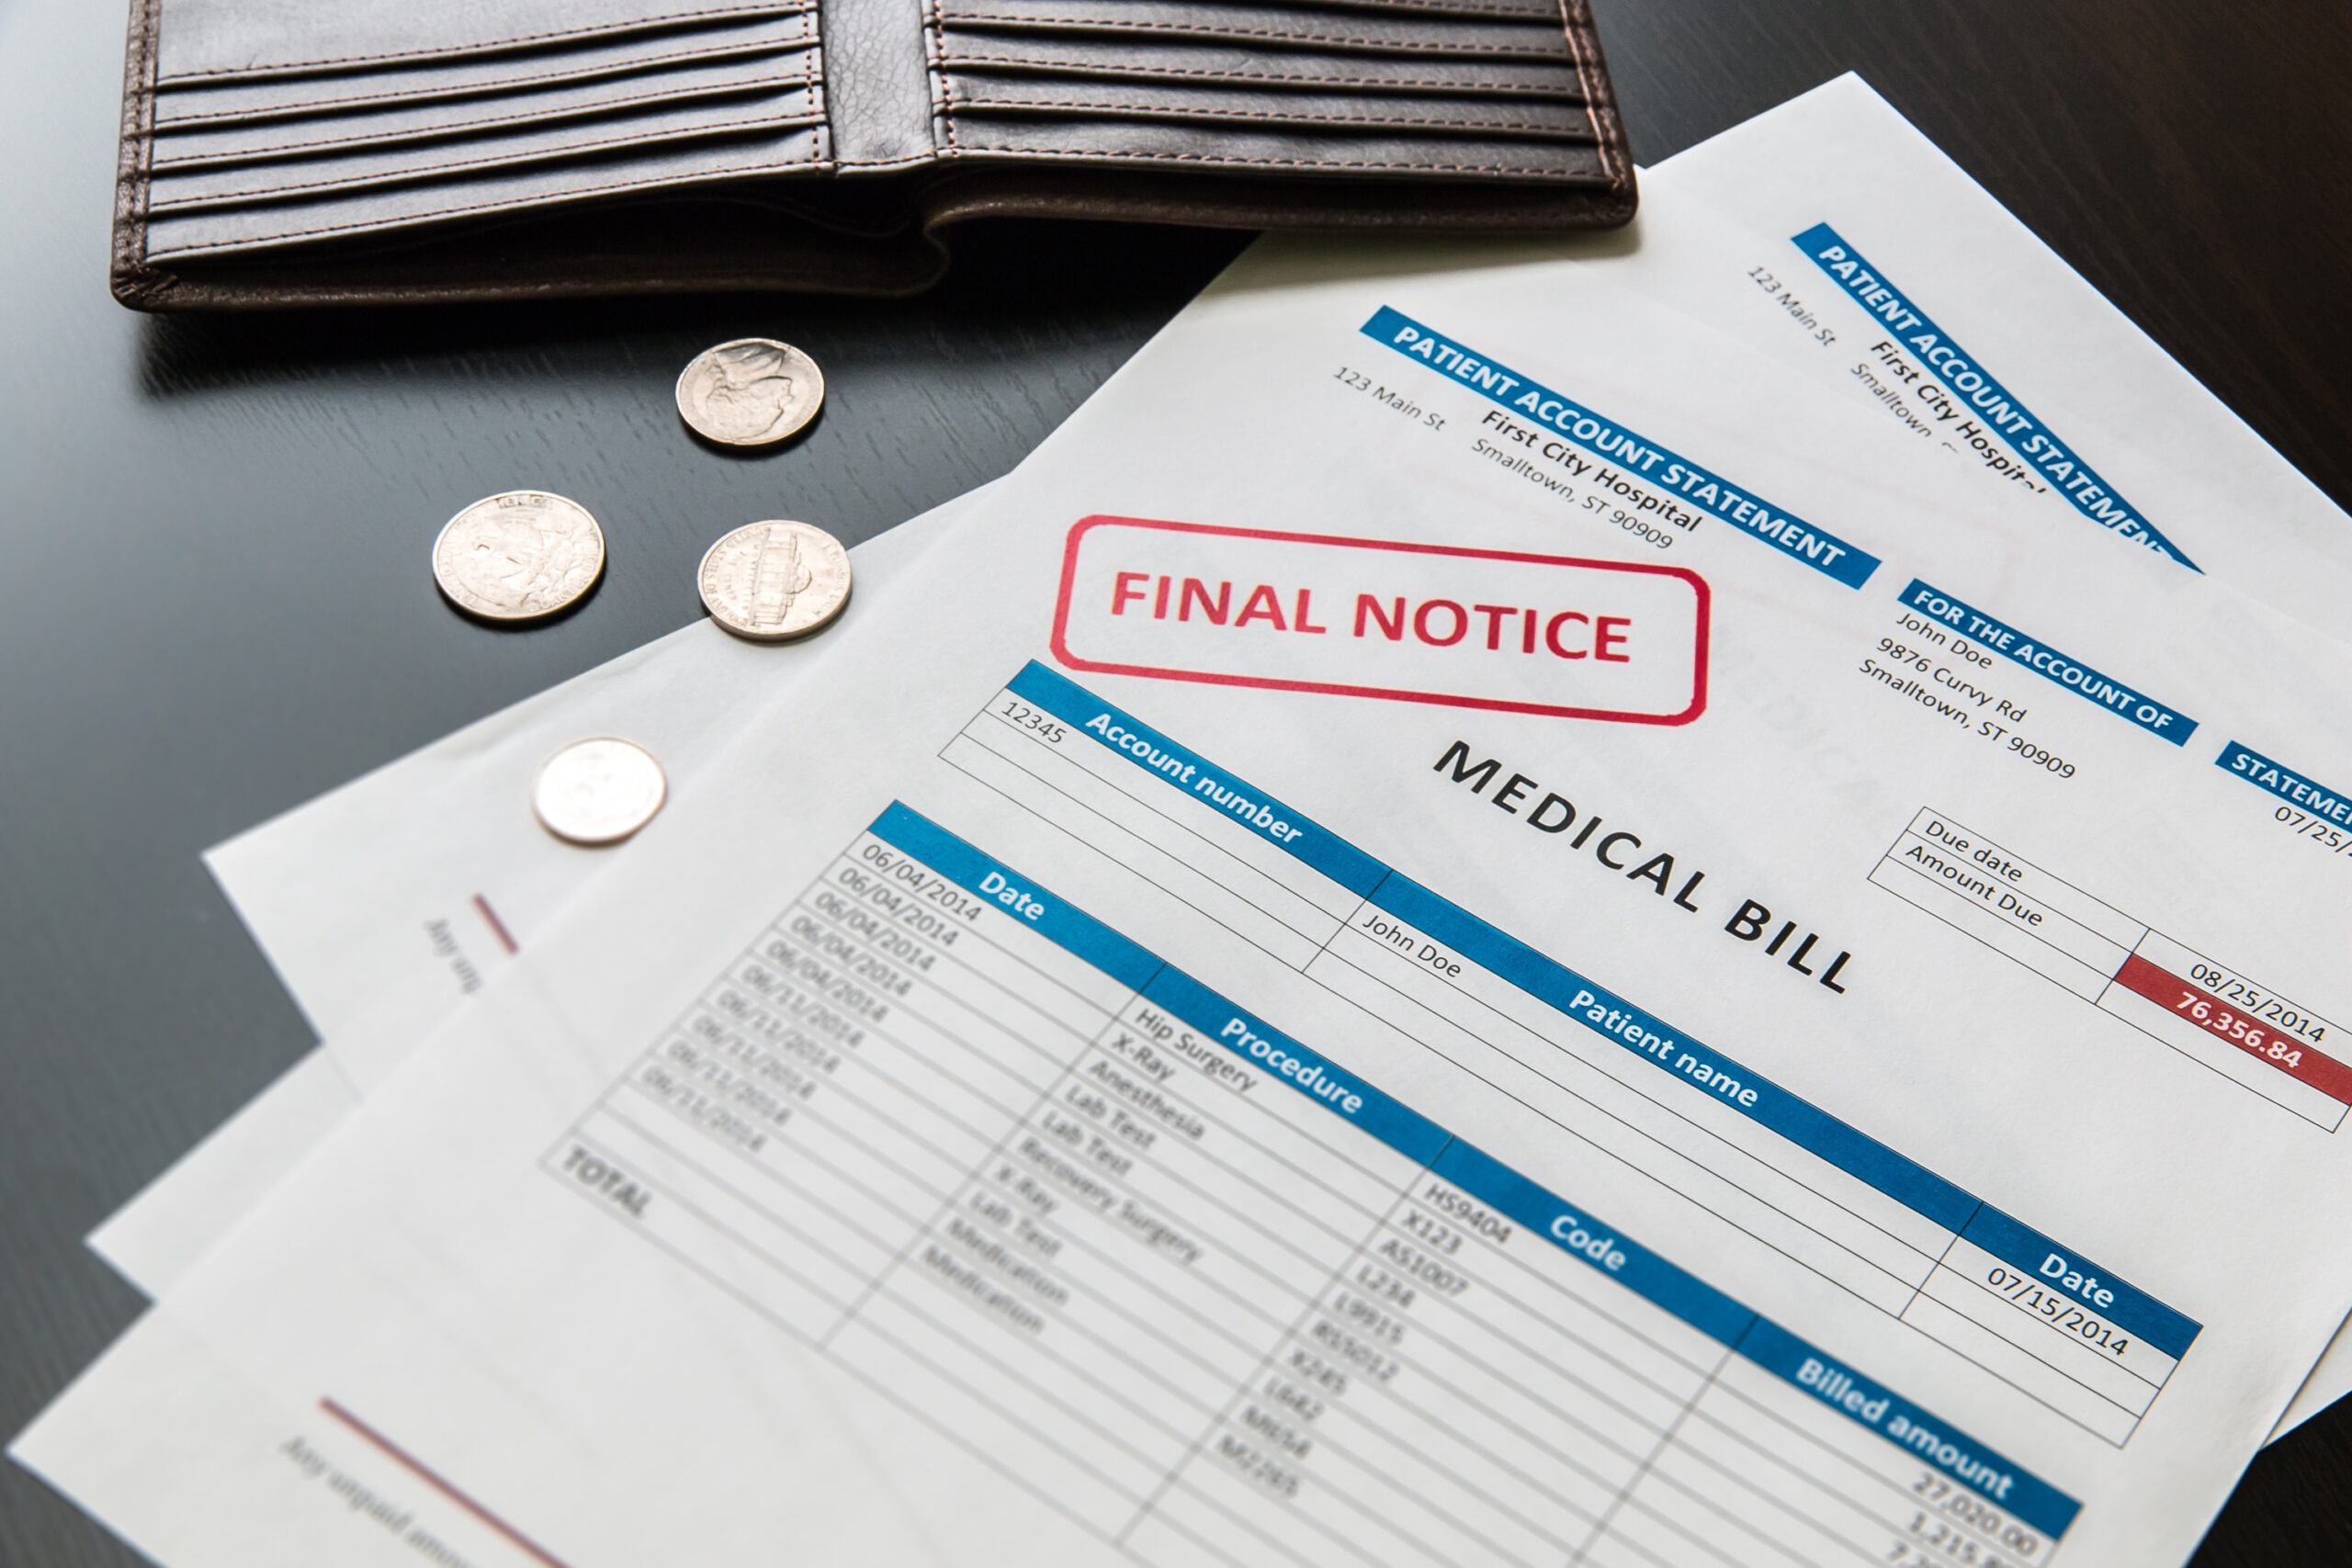 a final notice for unpaid medical bills following a car accident